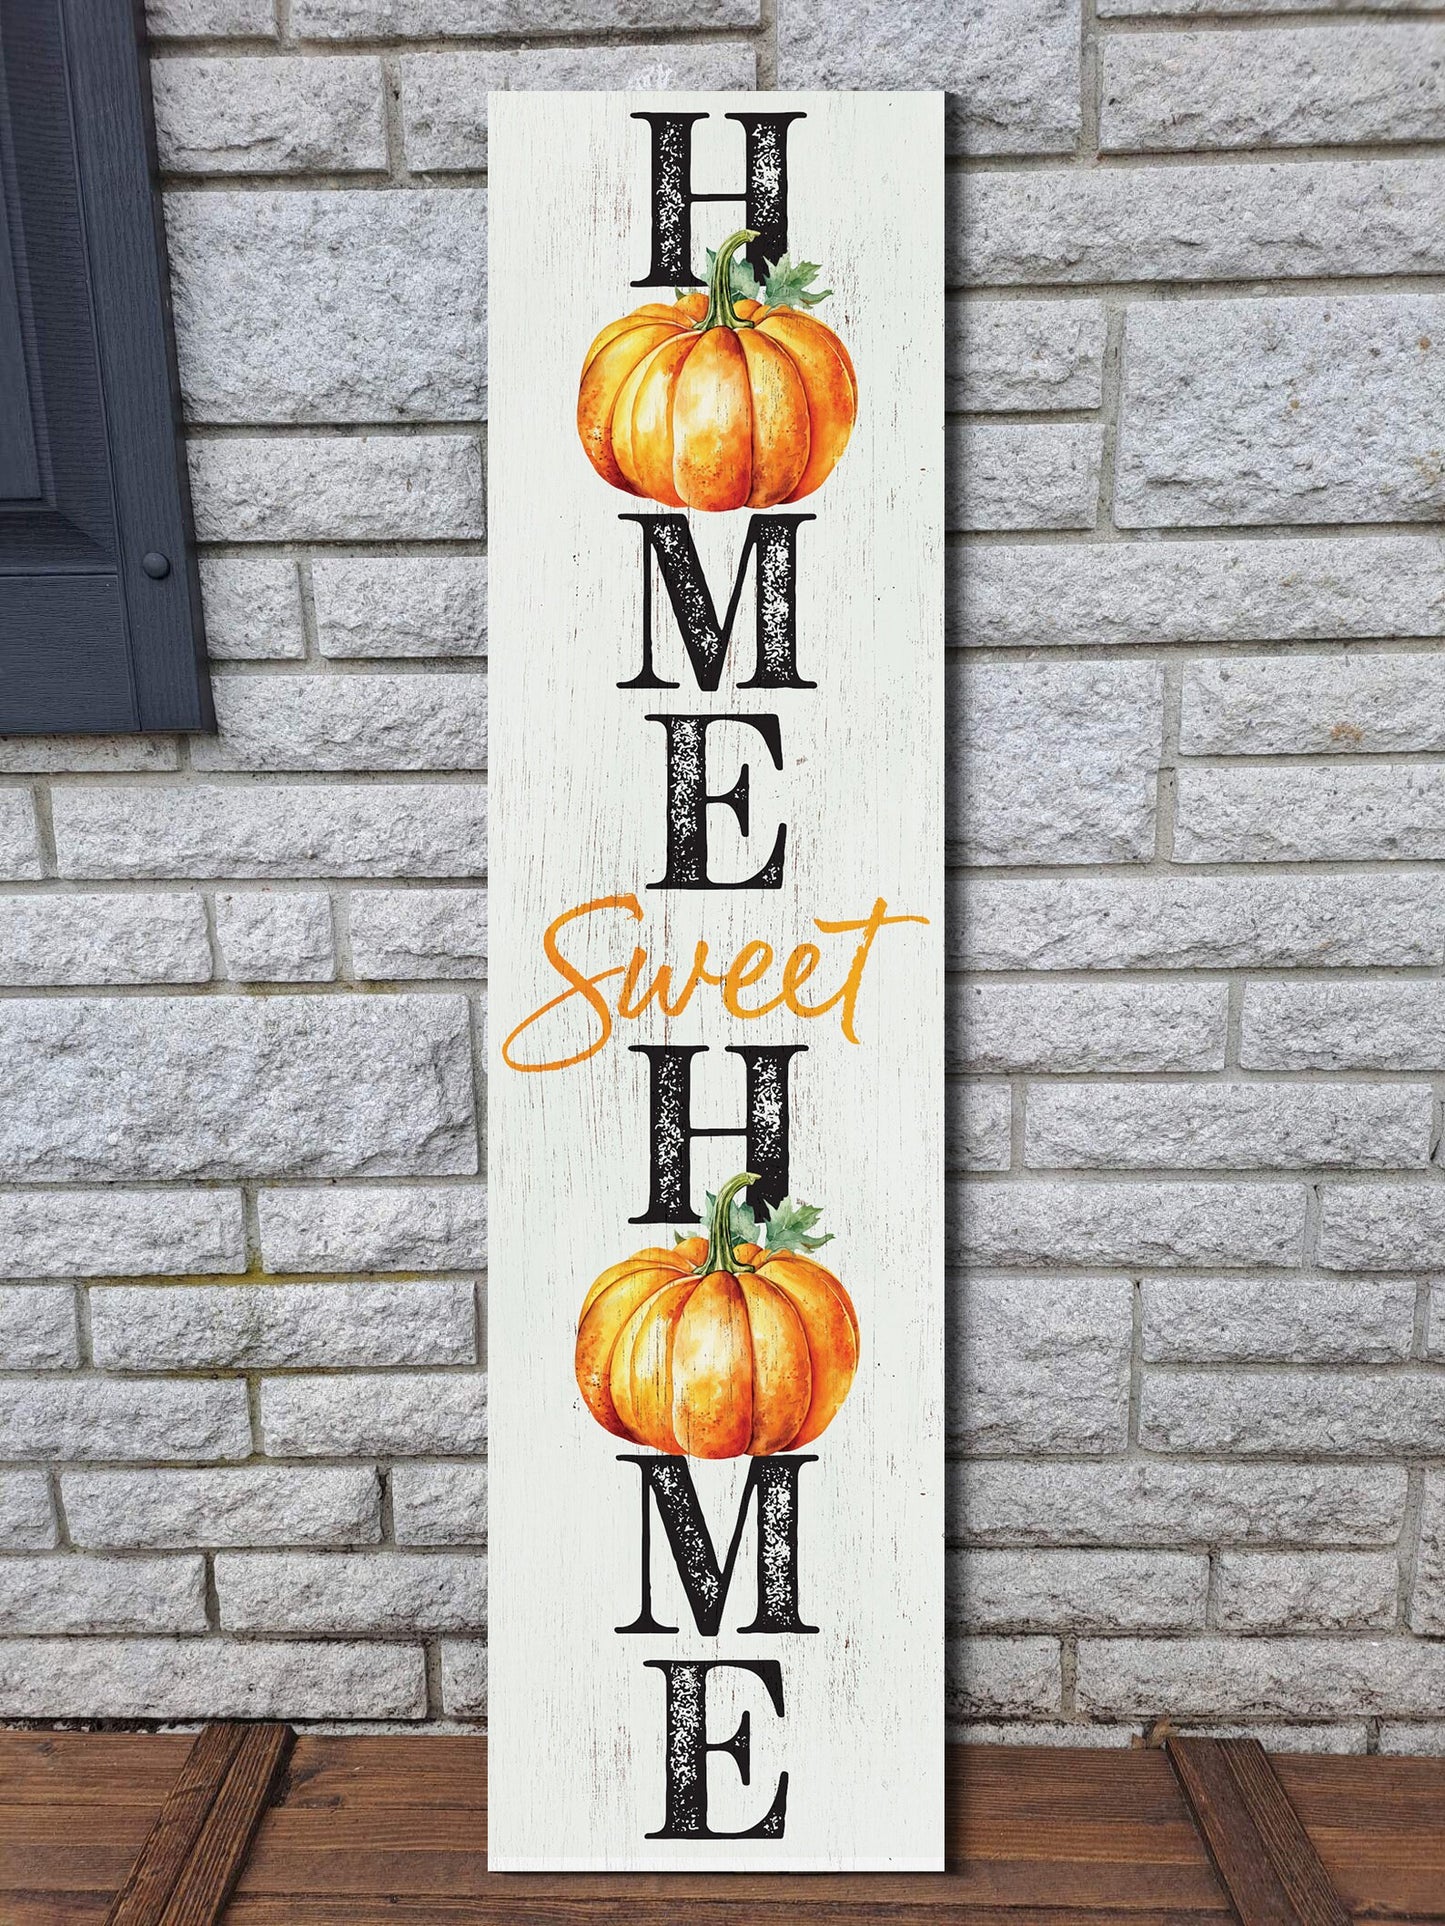 36in "Home Sweet Home" Fall Porch Sign - Pumpkin Sign for Front Door Decor during Autumn Celebrations